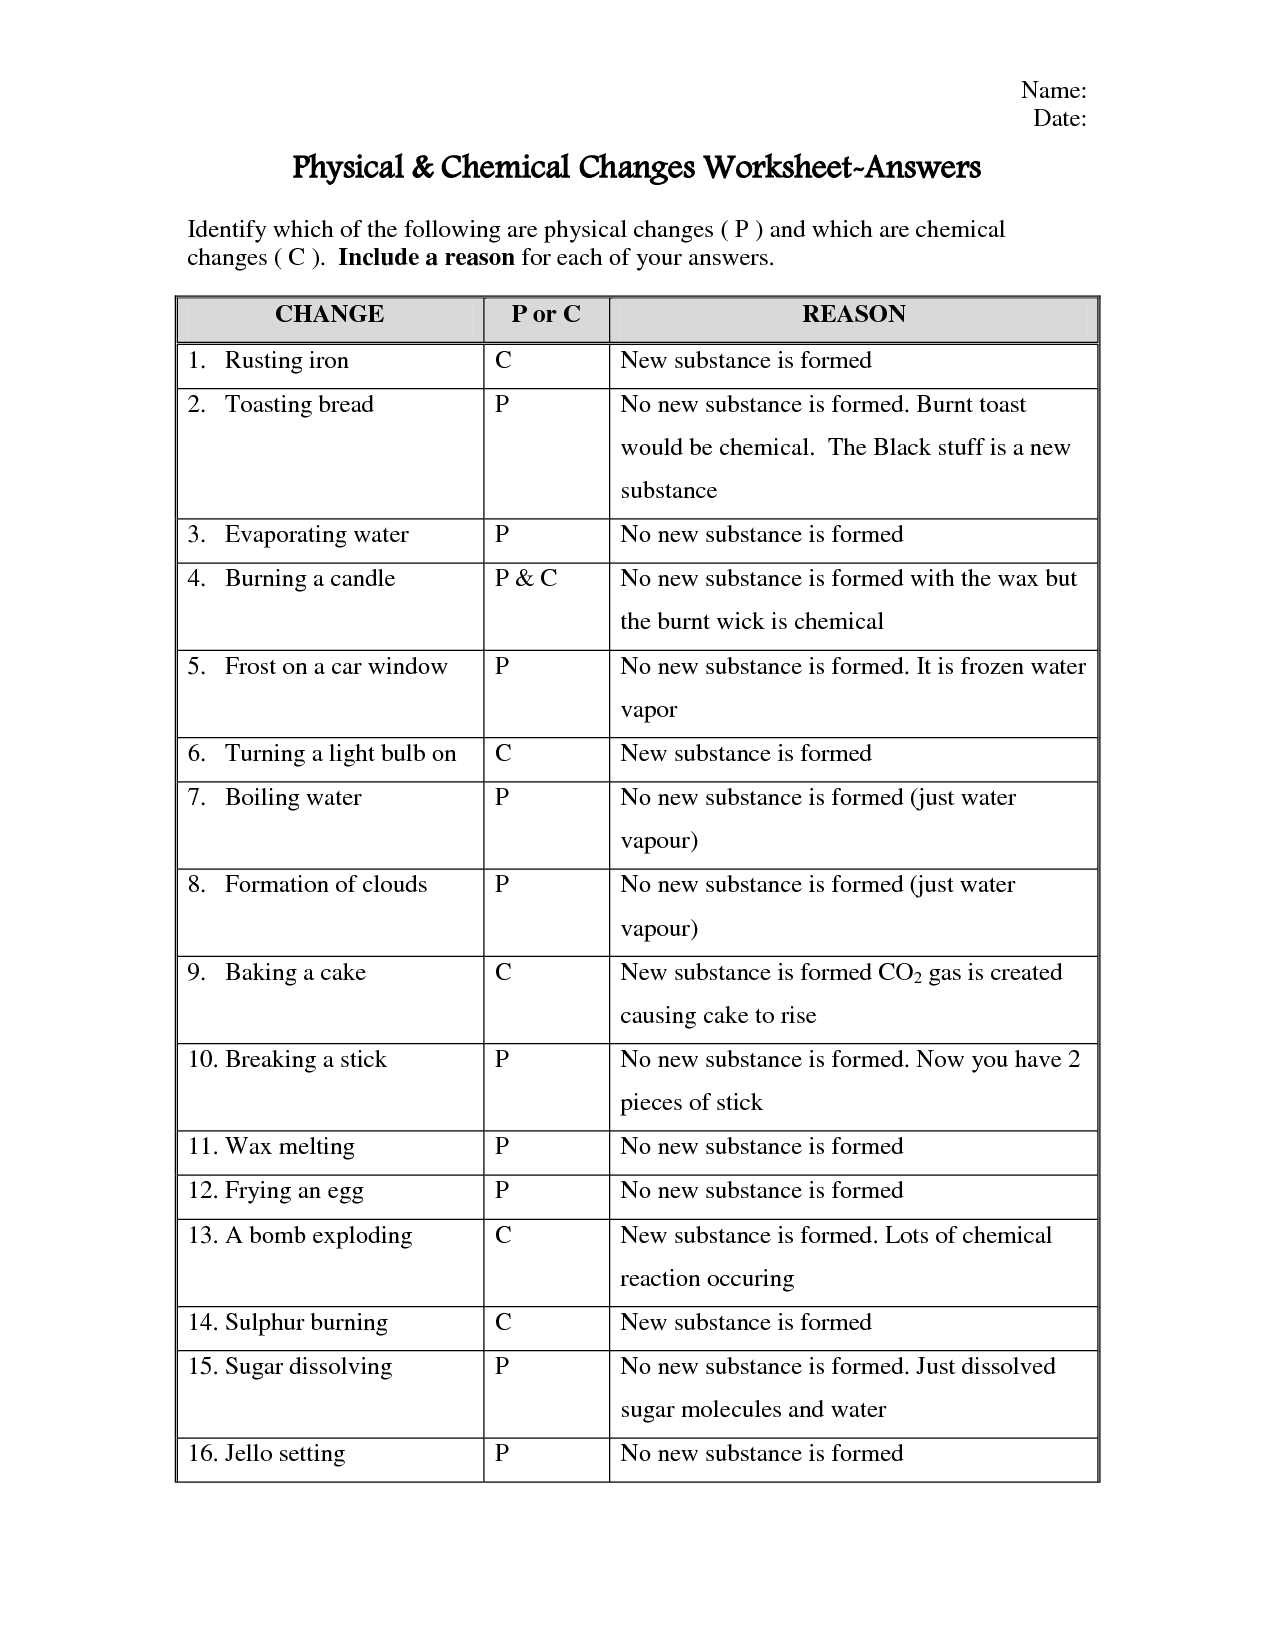 Introduction To Physical And Chemical Changes Worksheet Answers